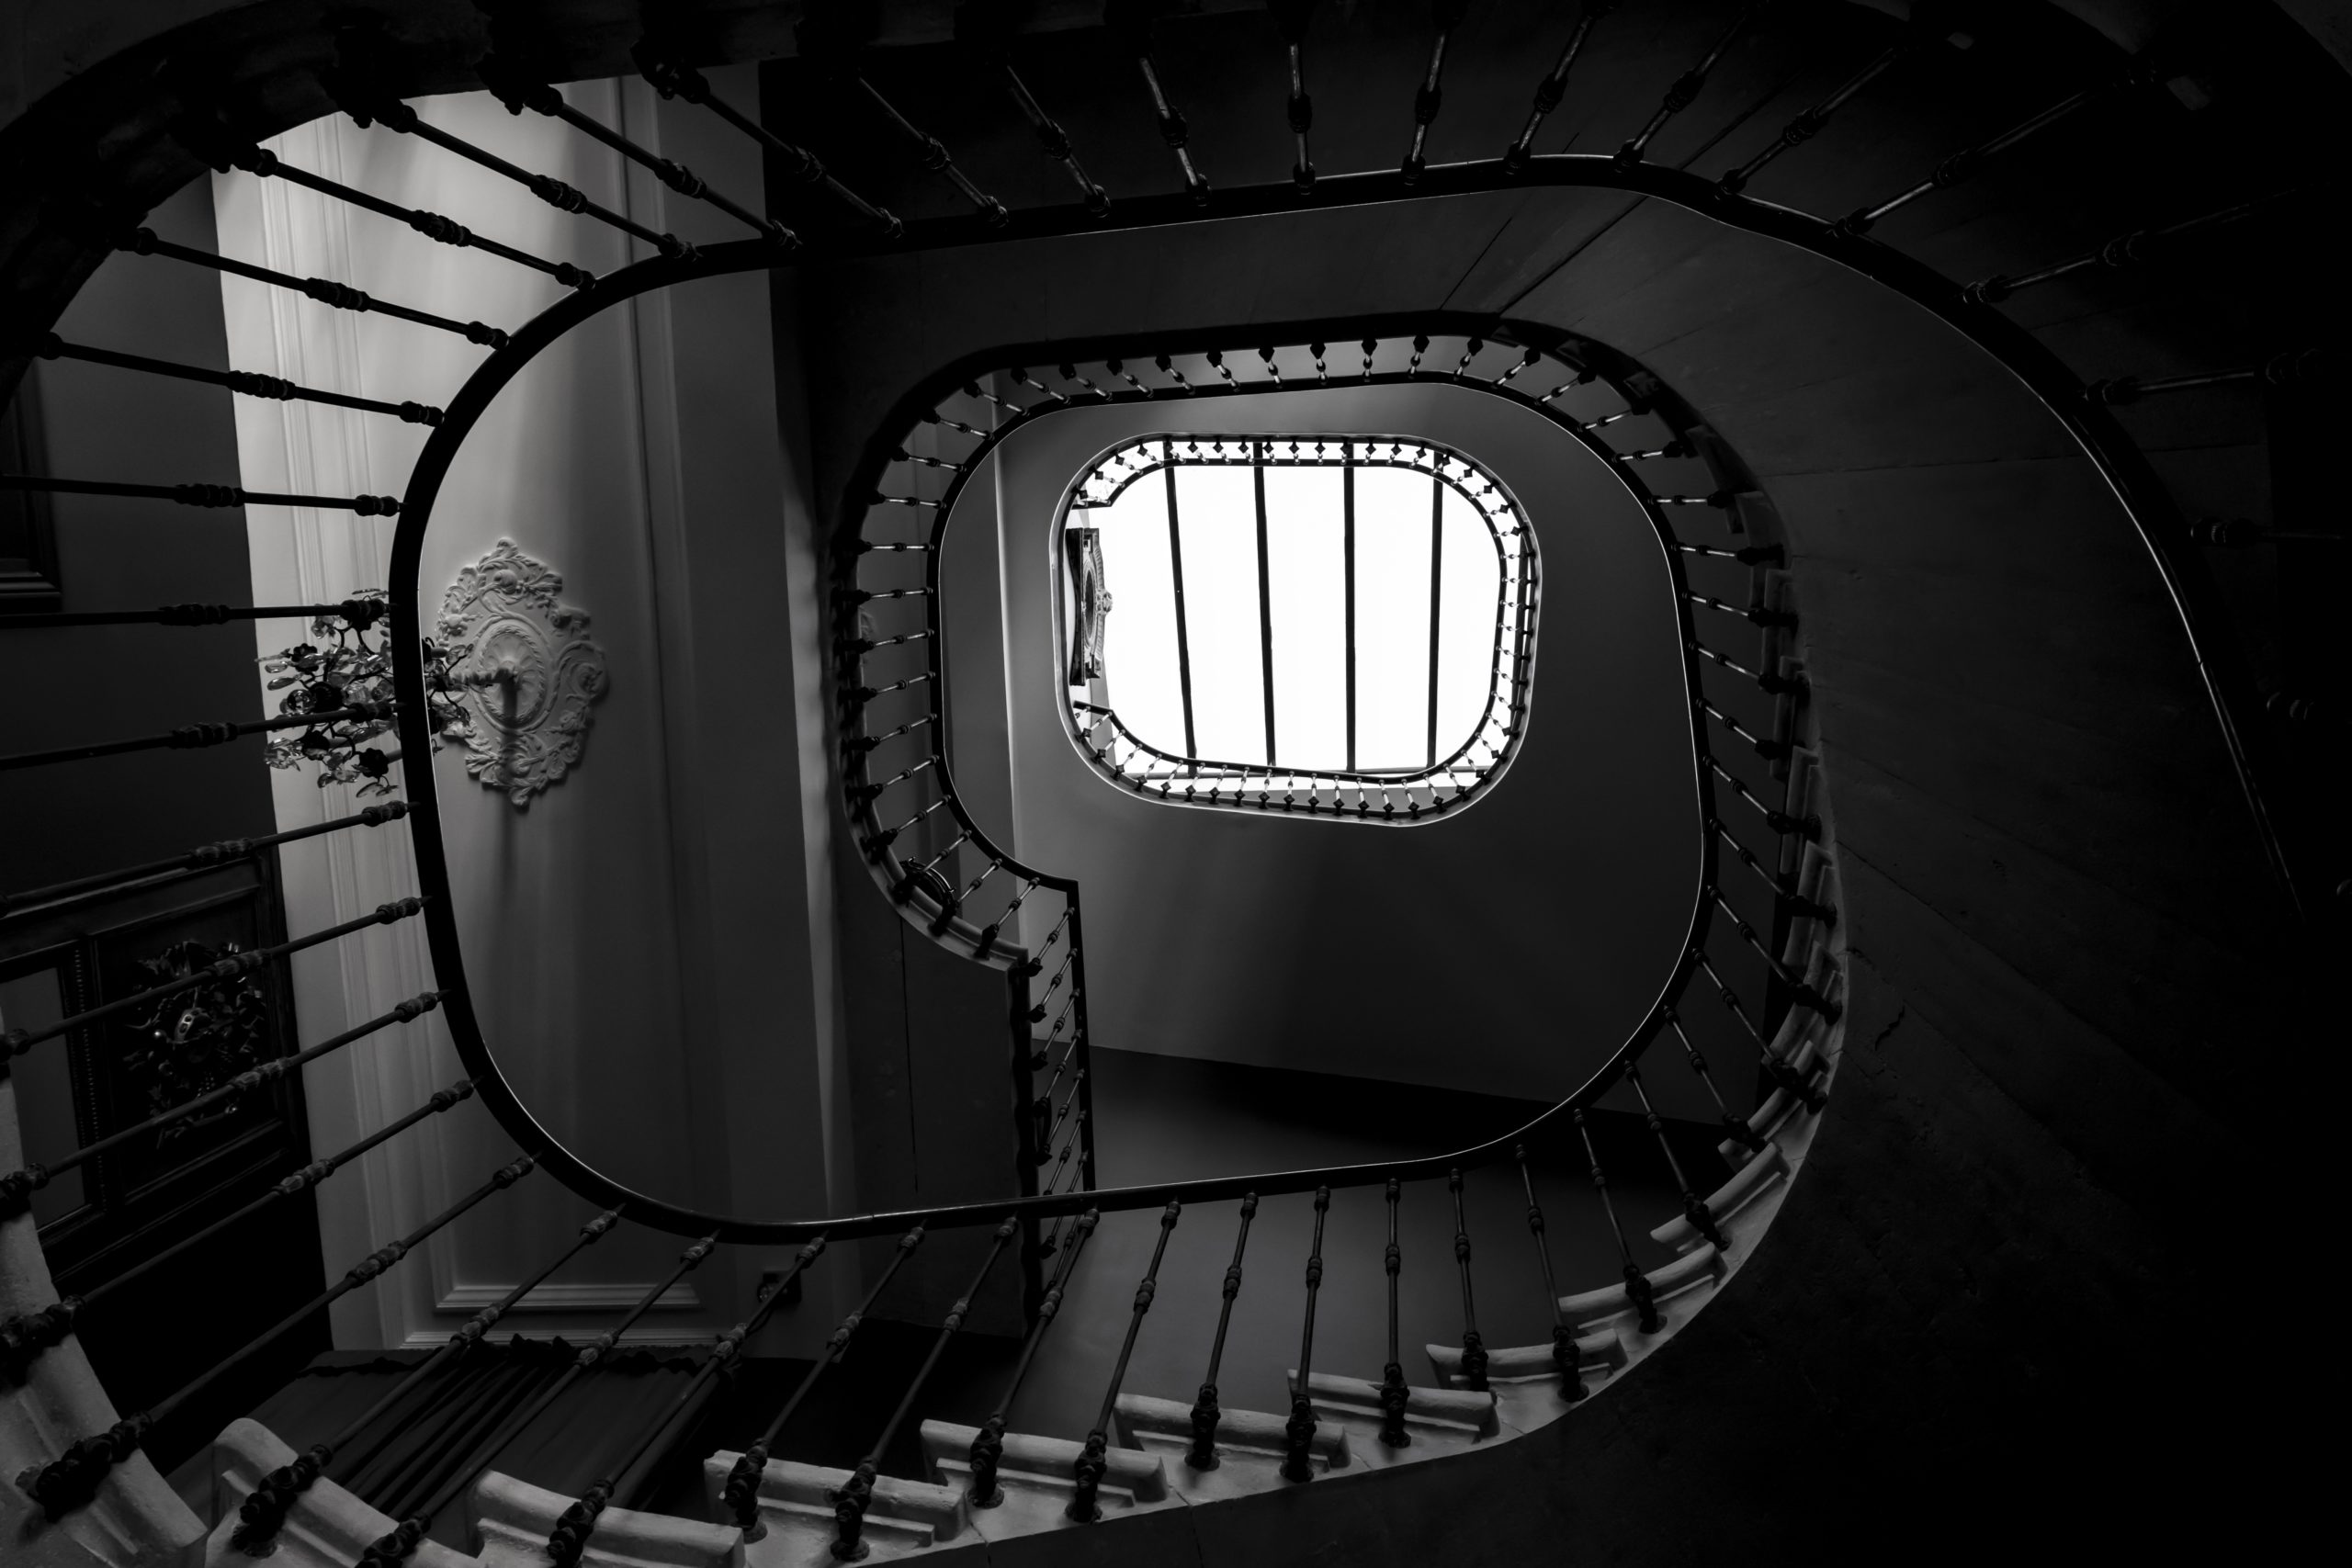 Greyscale shot of the spiral staircase of a building